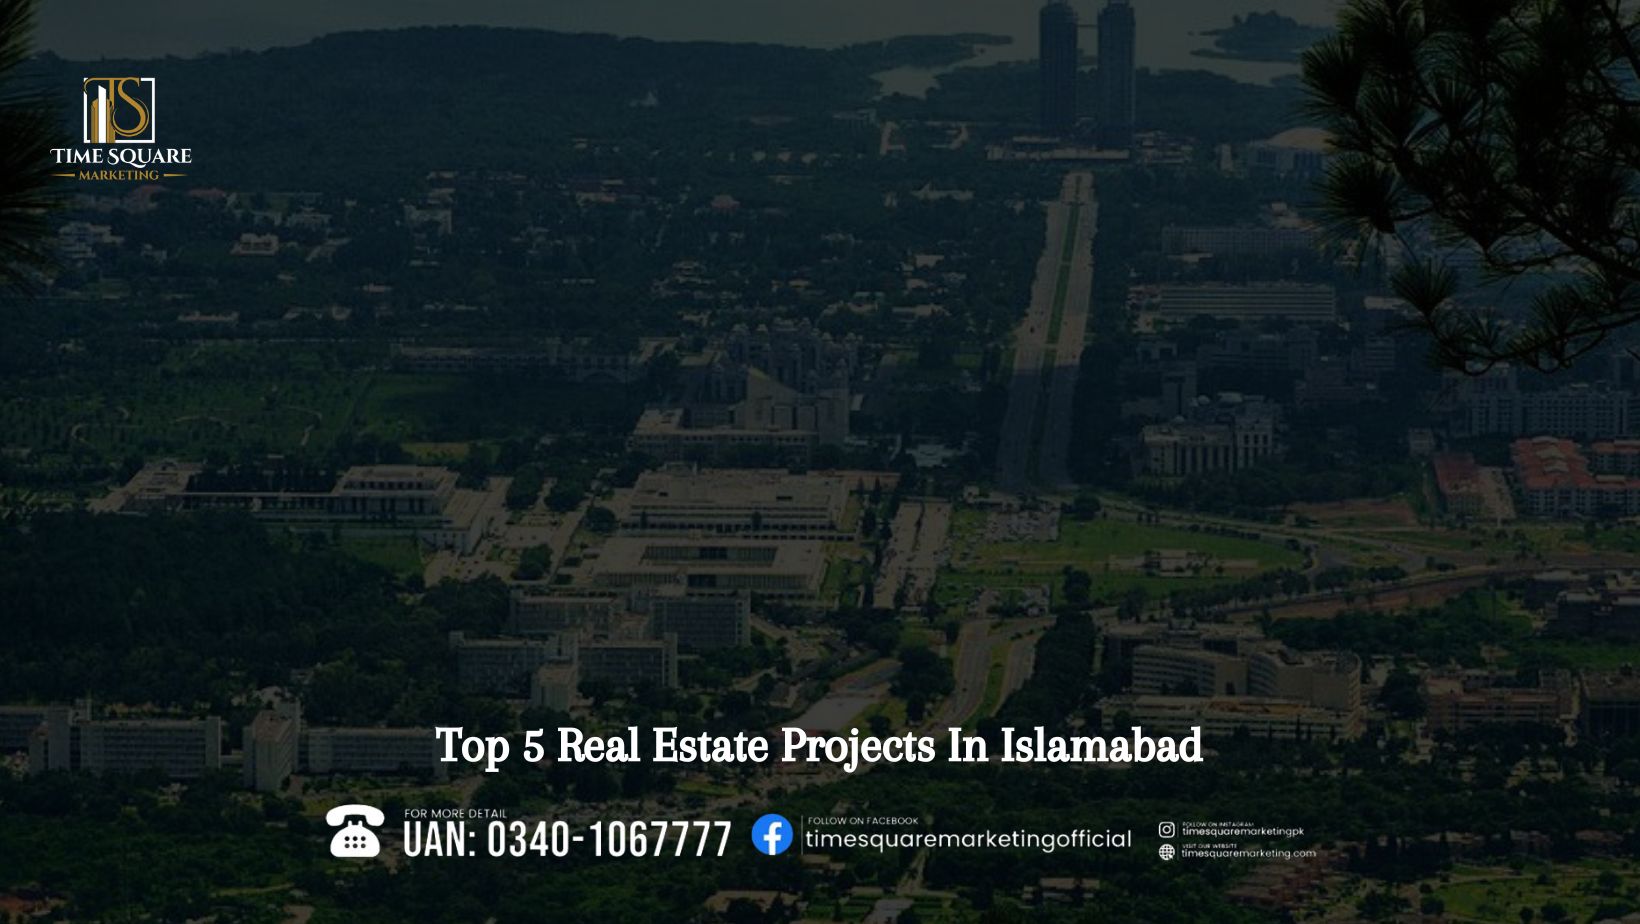 Top 5 Real Estate Projects In Islamabad